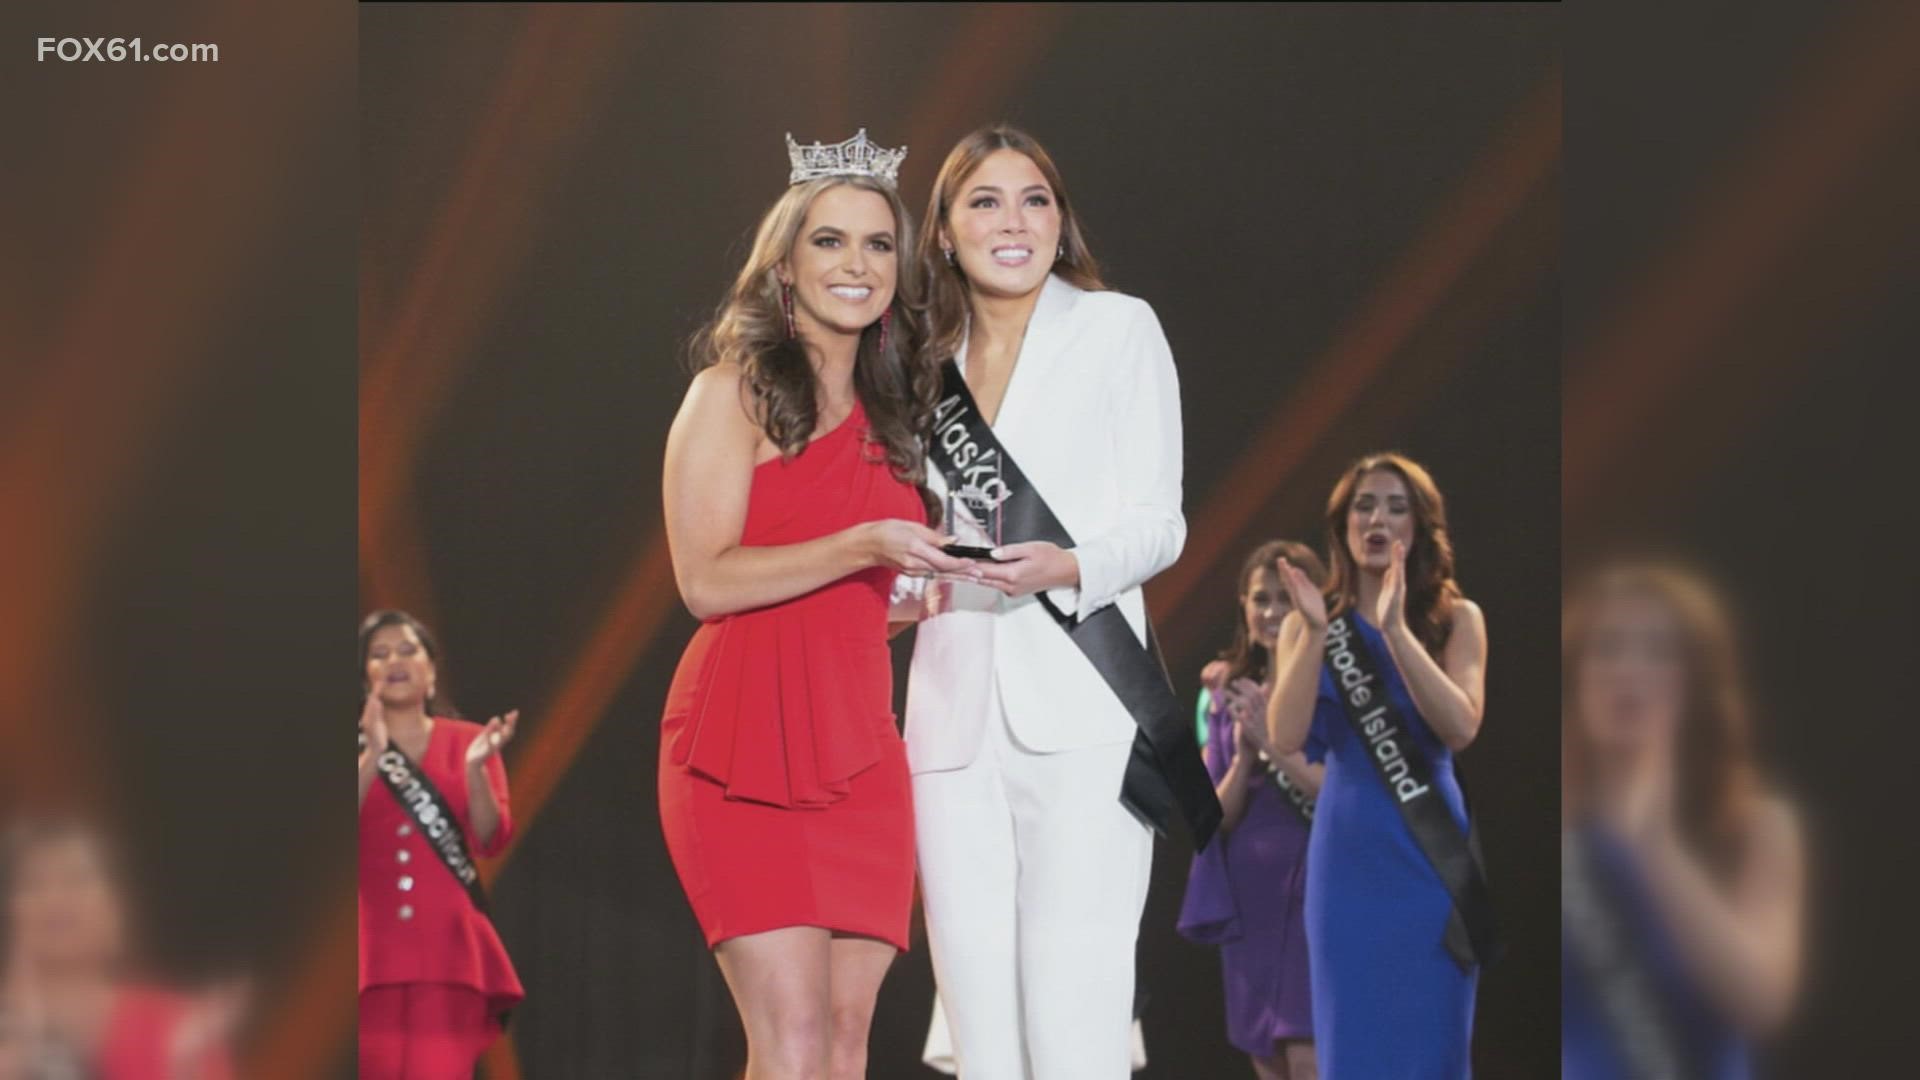 This is the 100th year of the Miss America competition and the organization is making history with some changes new to the competition this year.